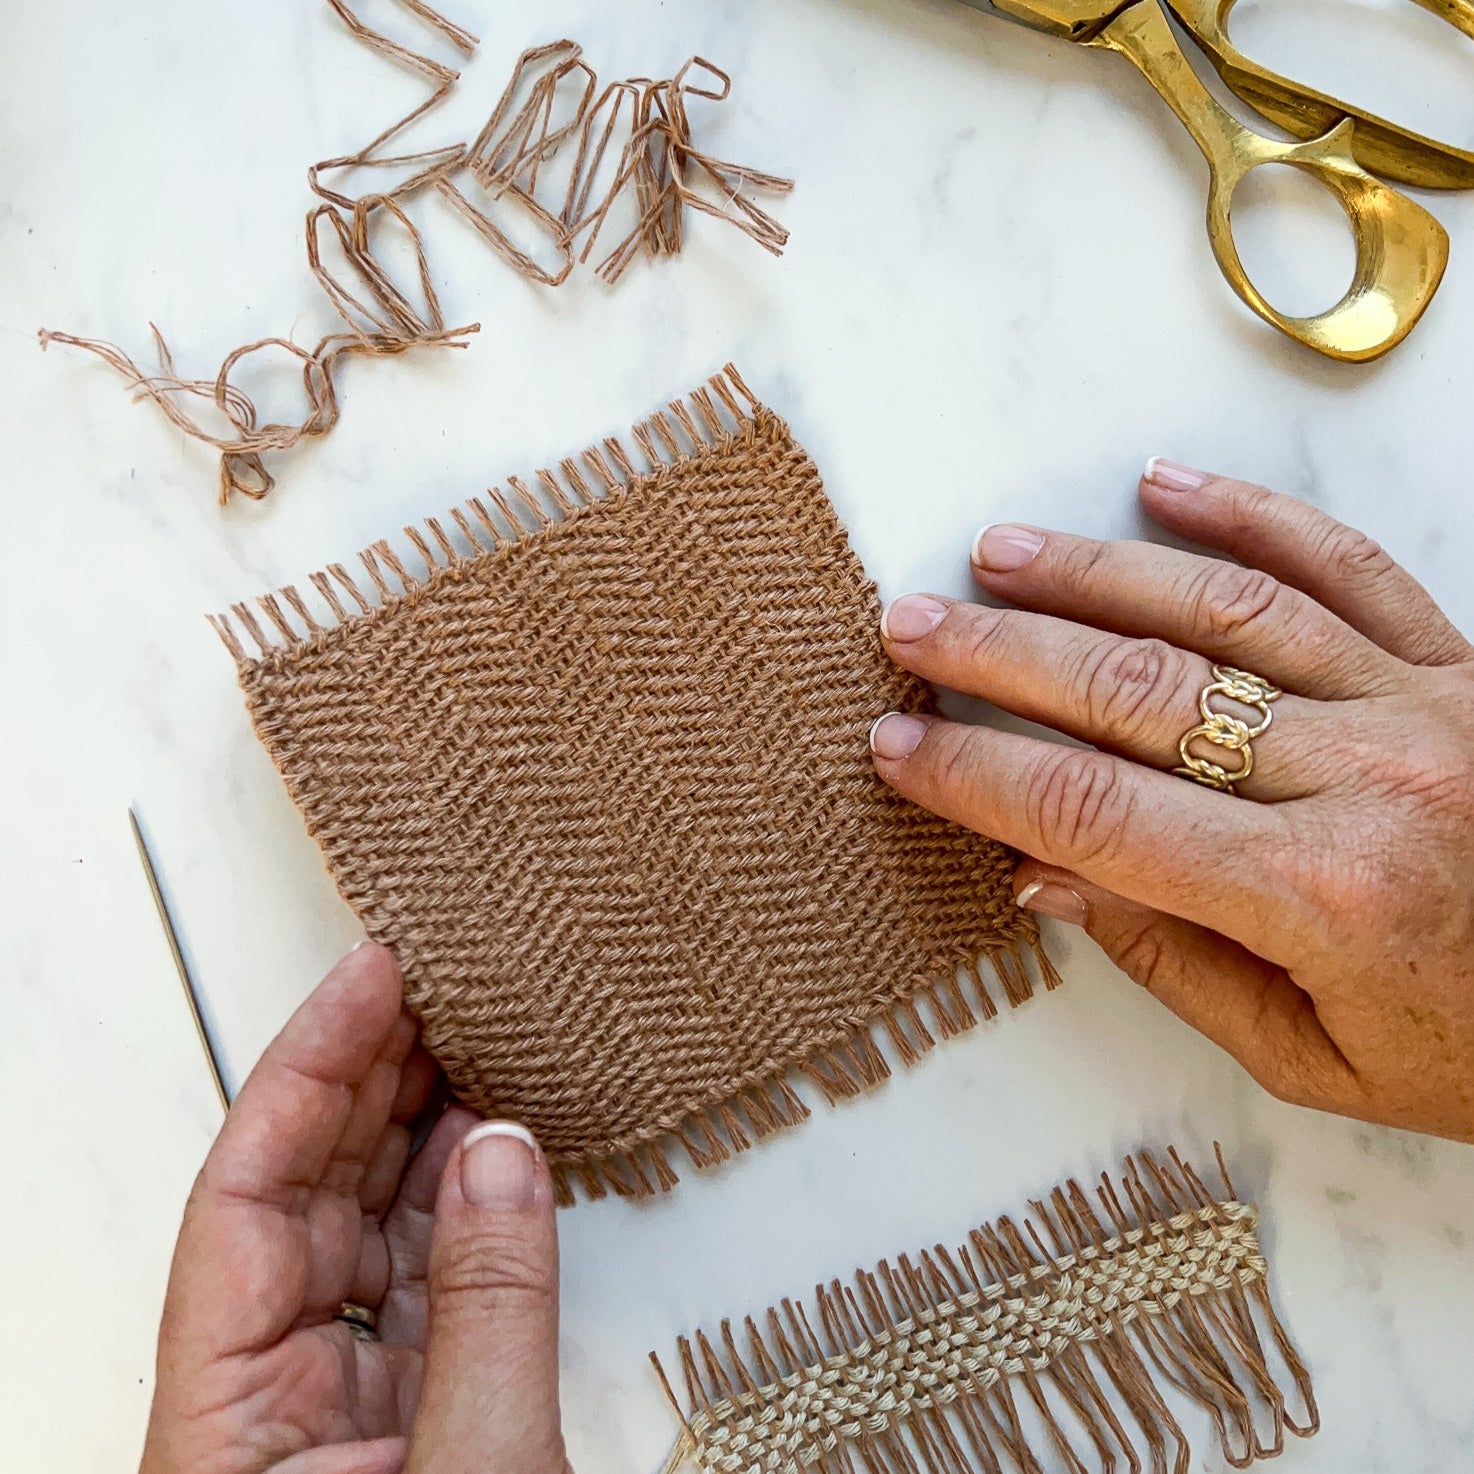 Weaving Loom Kit for a Useful DIY Project: Review of the Flax and Twine -  The Craft Blogger